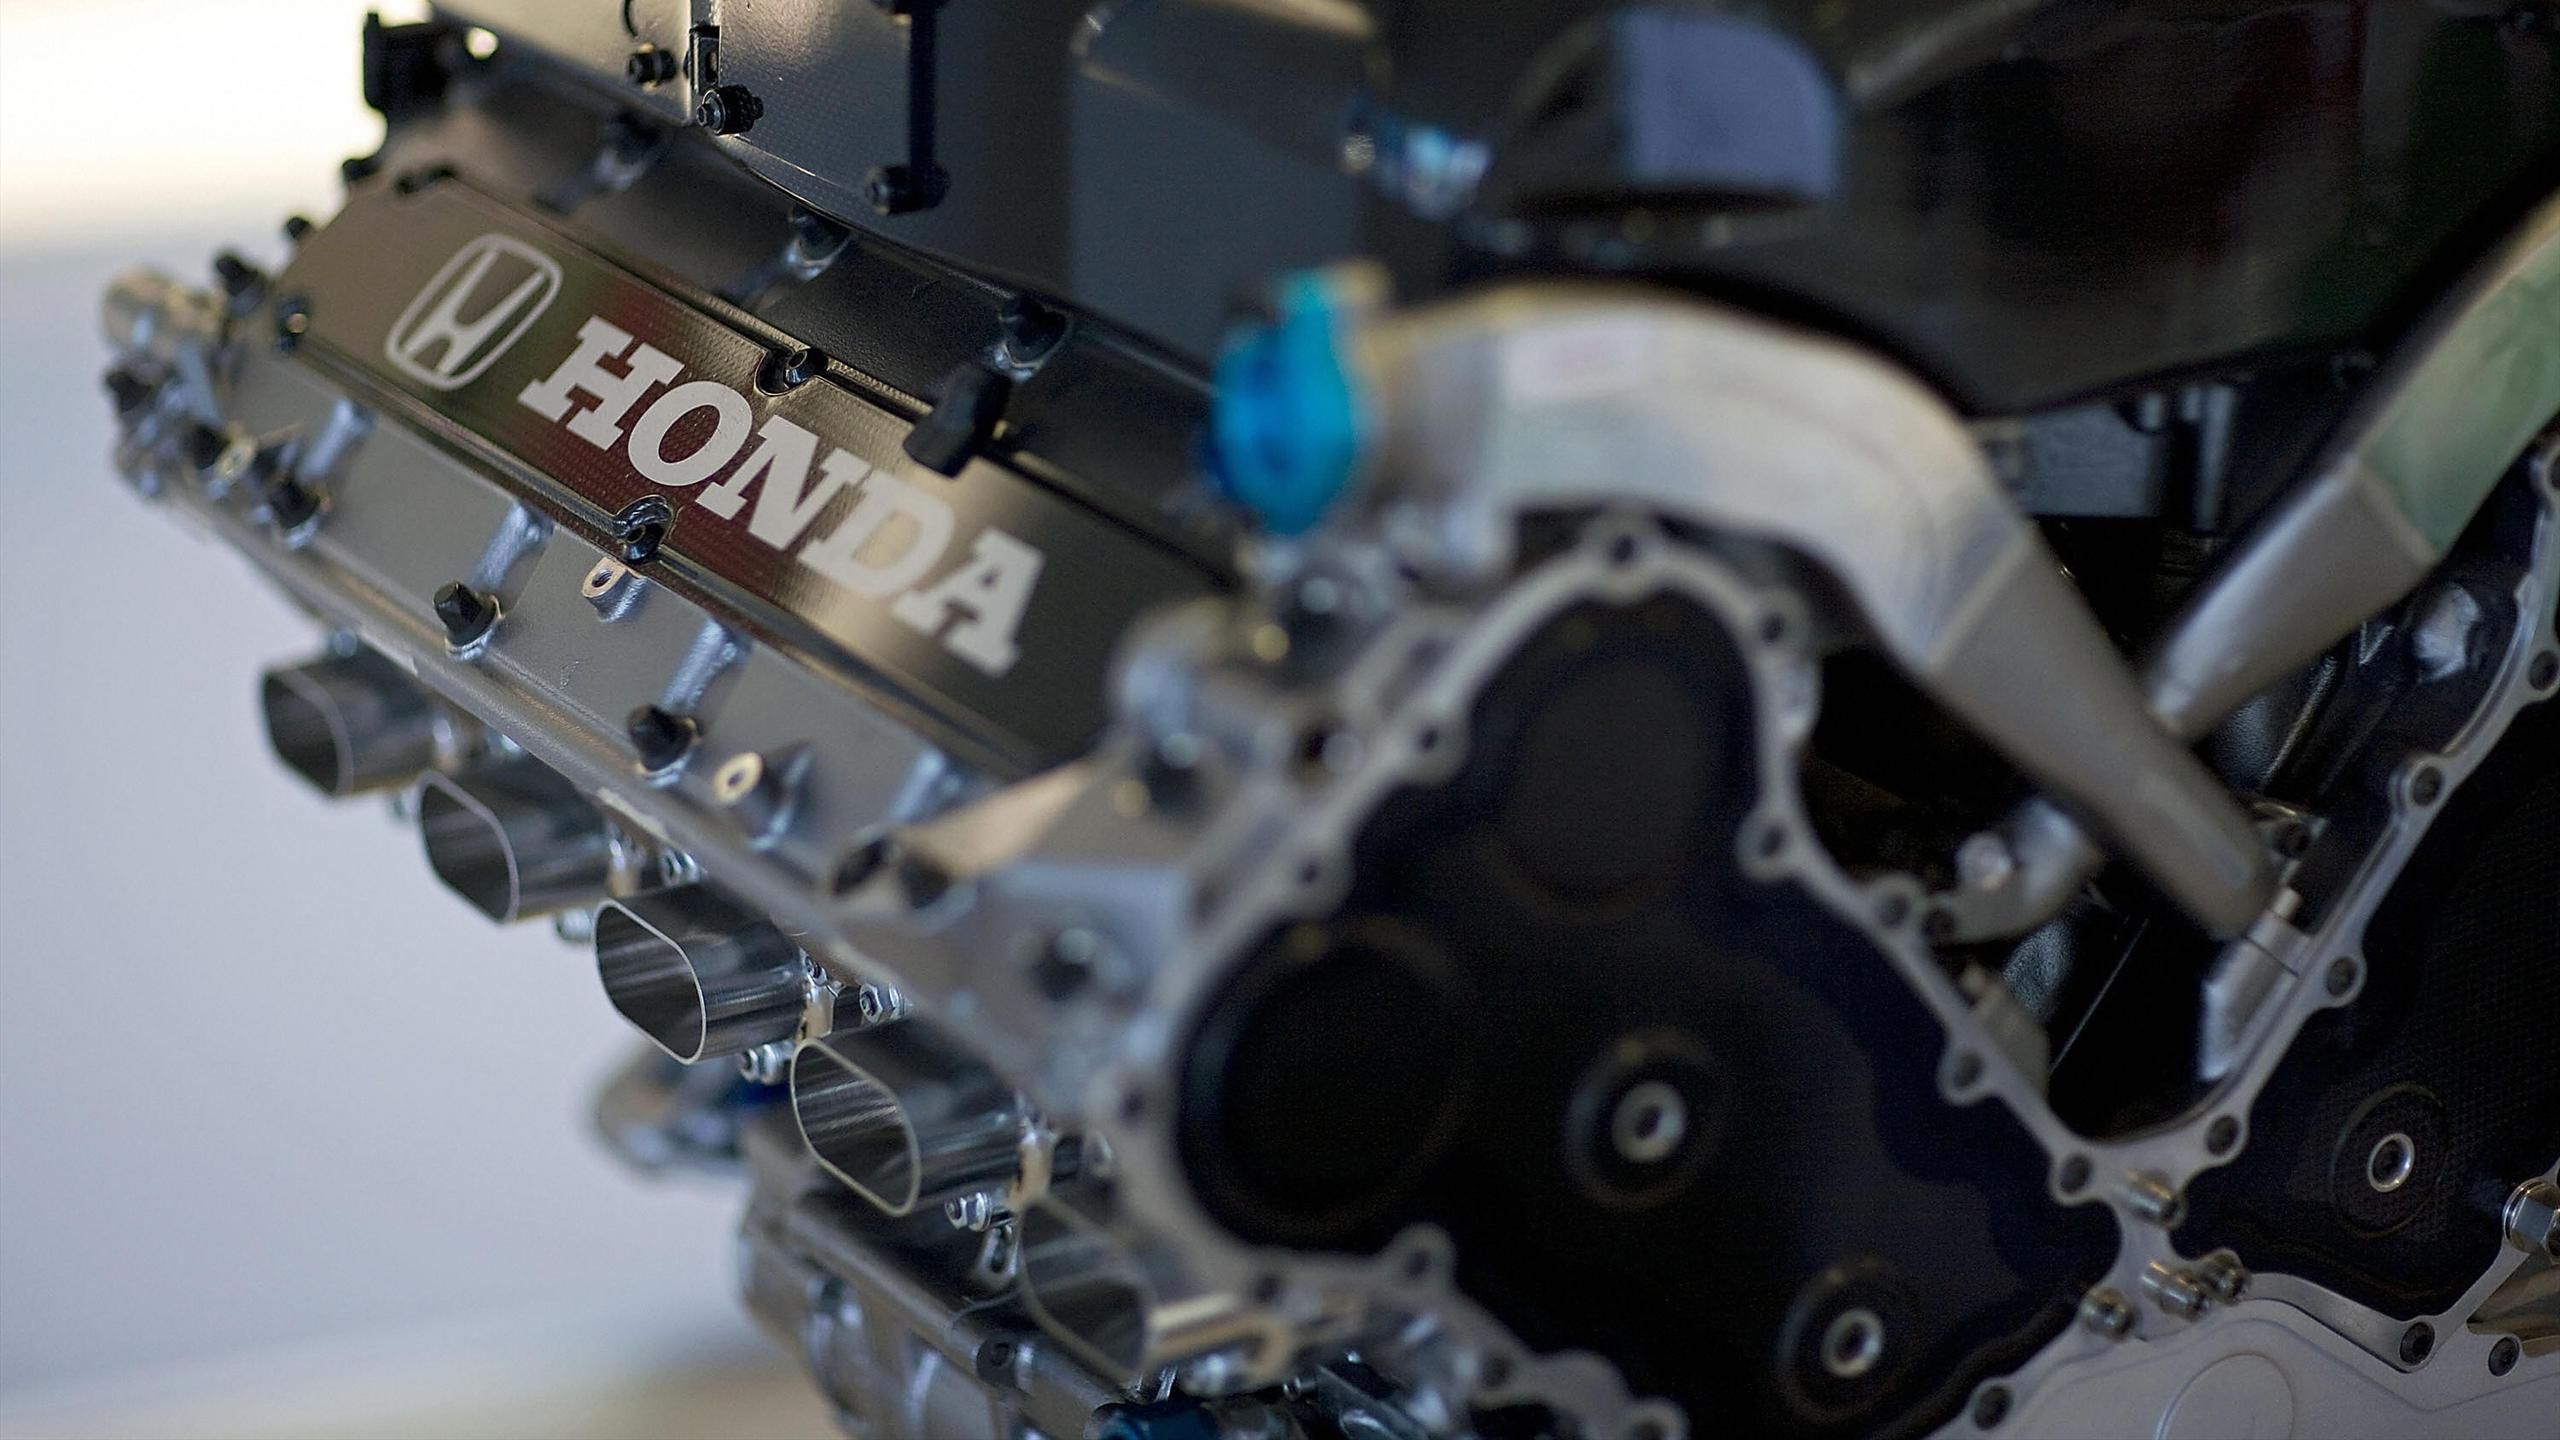 Honda Establishes New F1 Engine Facility in the UK in Collaboration with Aston Martin